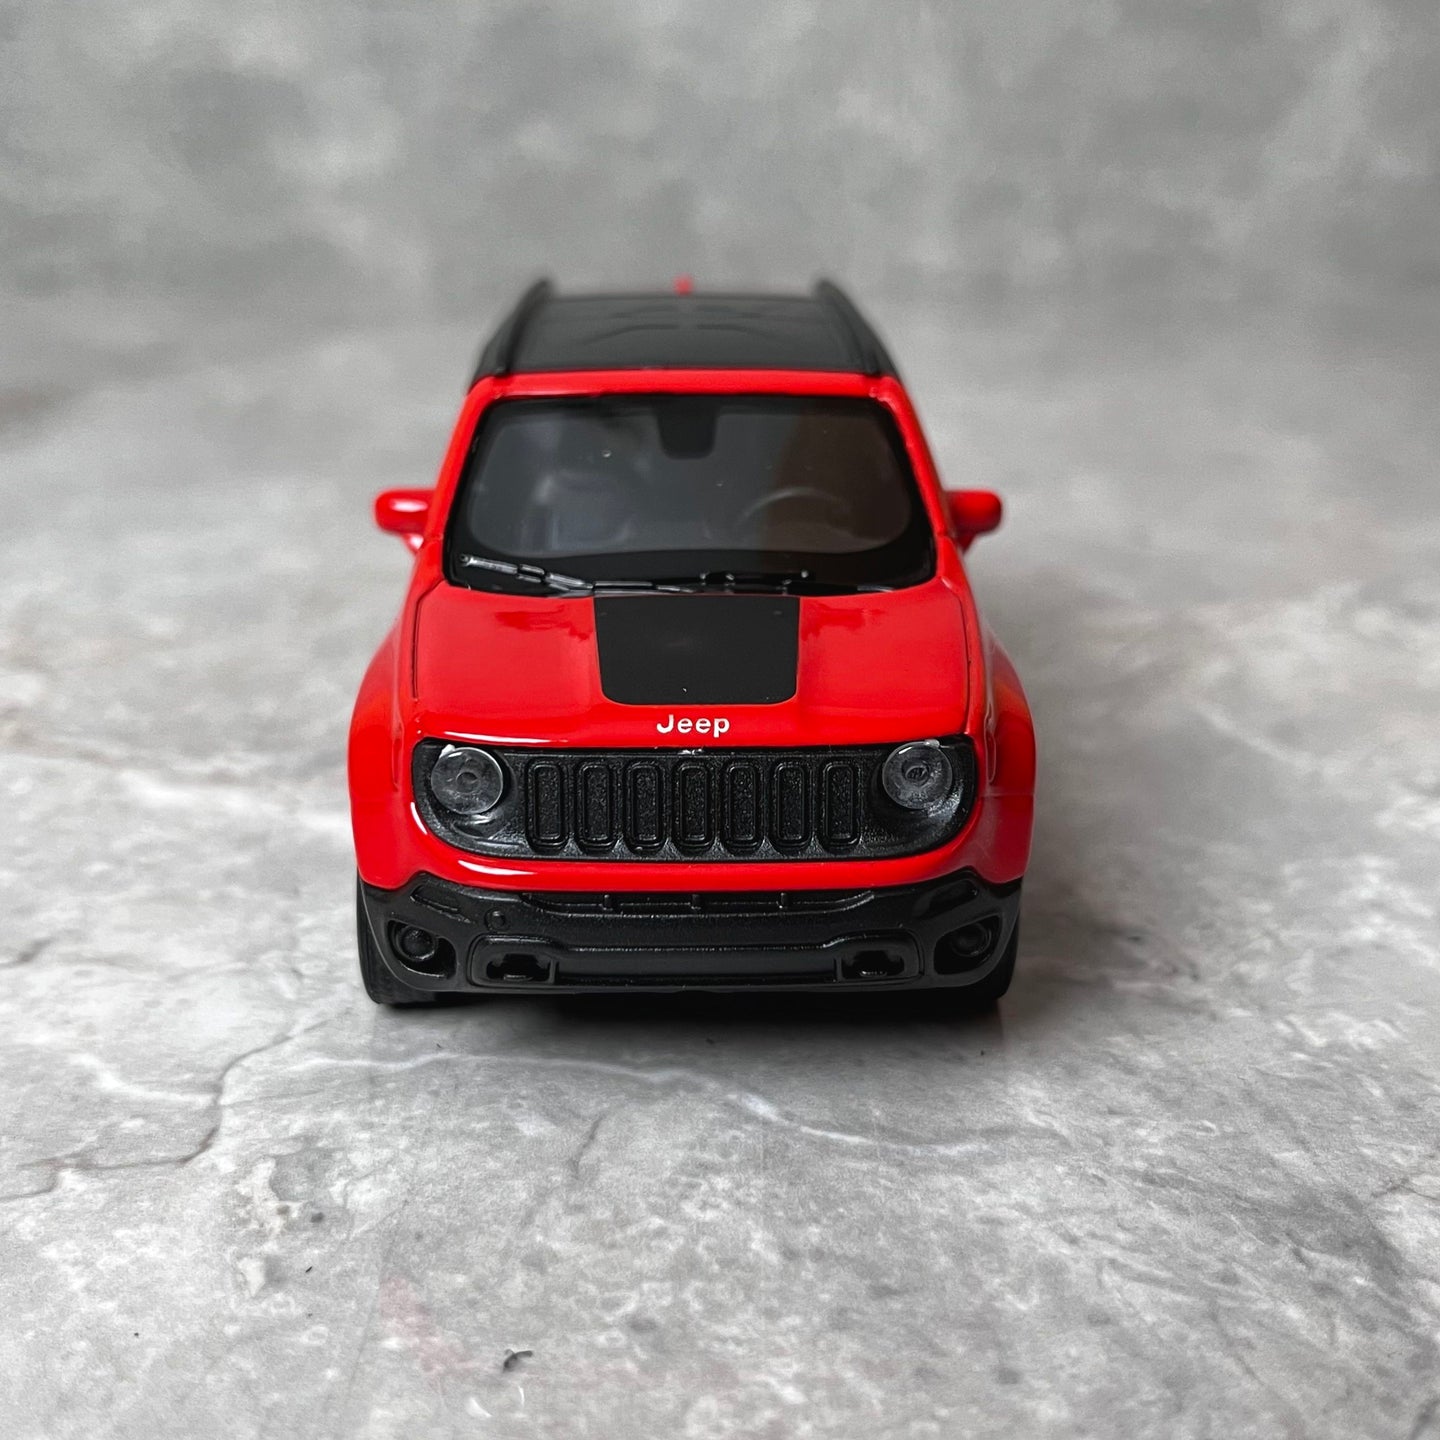 1:36 Jeep Renegade Trailhawk Diecast Car Model By Welly